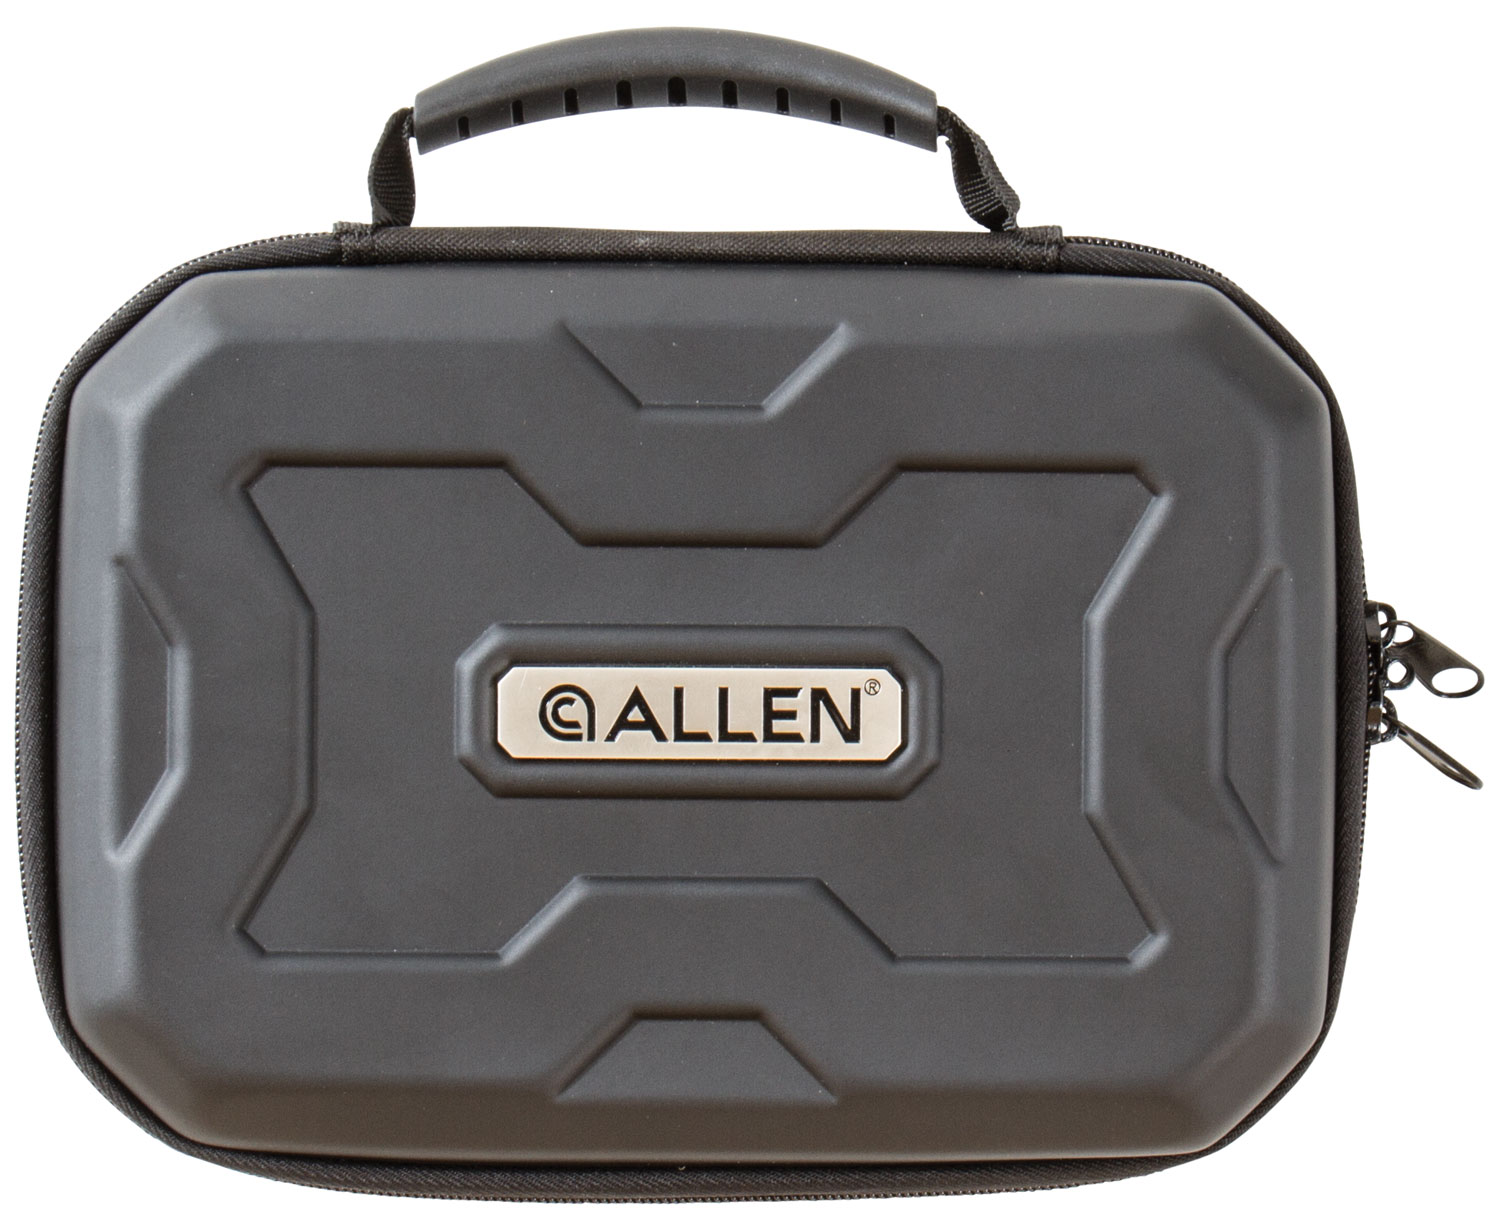 Allen 829 EXO Handgun Case made Polymer with Black Finish, Molded Carry Handle, Egg Crate Foam & Lockable Zippers 9